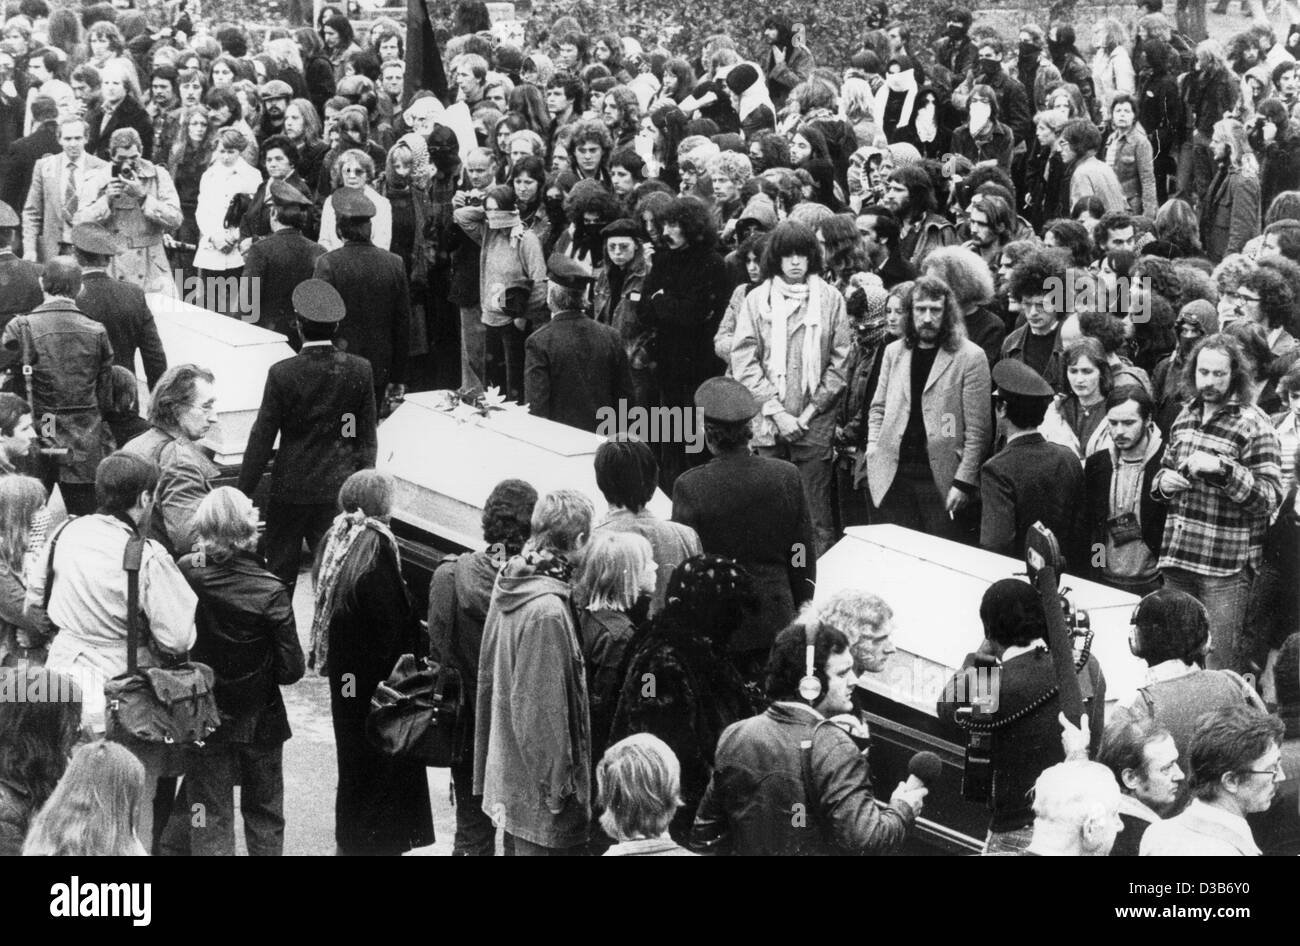 (dpa files) - The coffins of the RAF terrorists Gudrun Ensslin, Andreas Baader and Jan Carl Raspe are carried by coffin bearers during a funeral procession to the cemetery in Dornhalden, Stuttgart, 27 October 1977. Raspe was tried with Ulrike Meinhof, Andreas Baader, and Gudrun Ensslin in a trial he Stock Photo